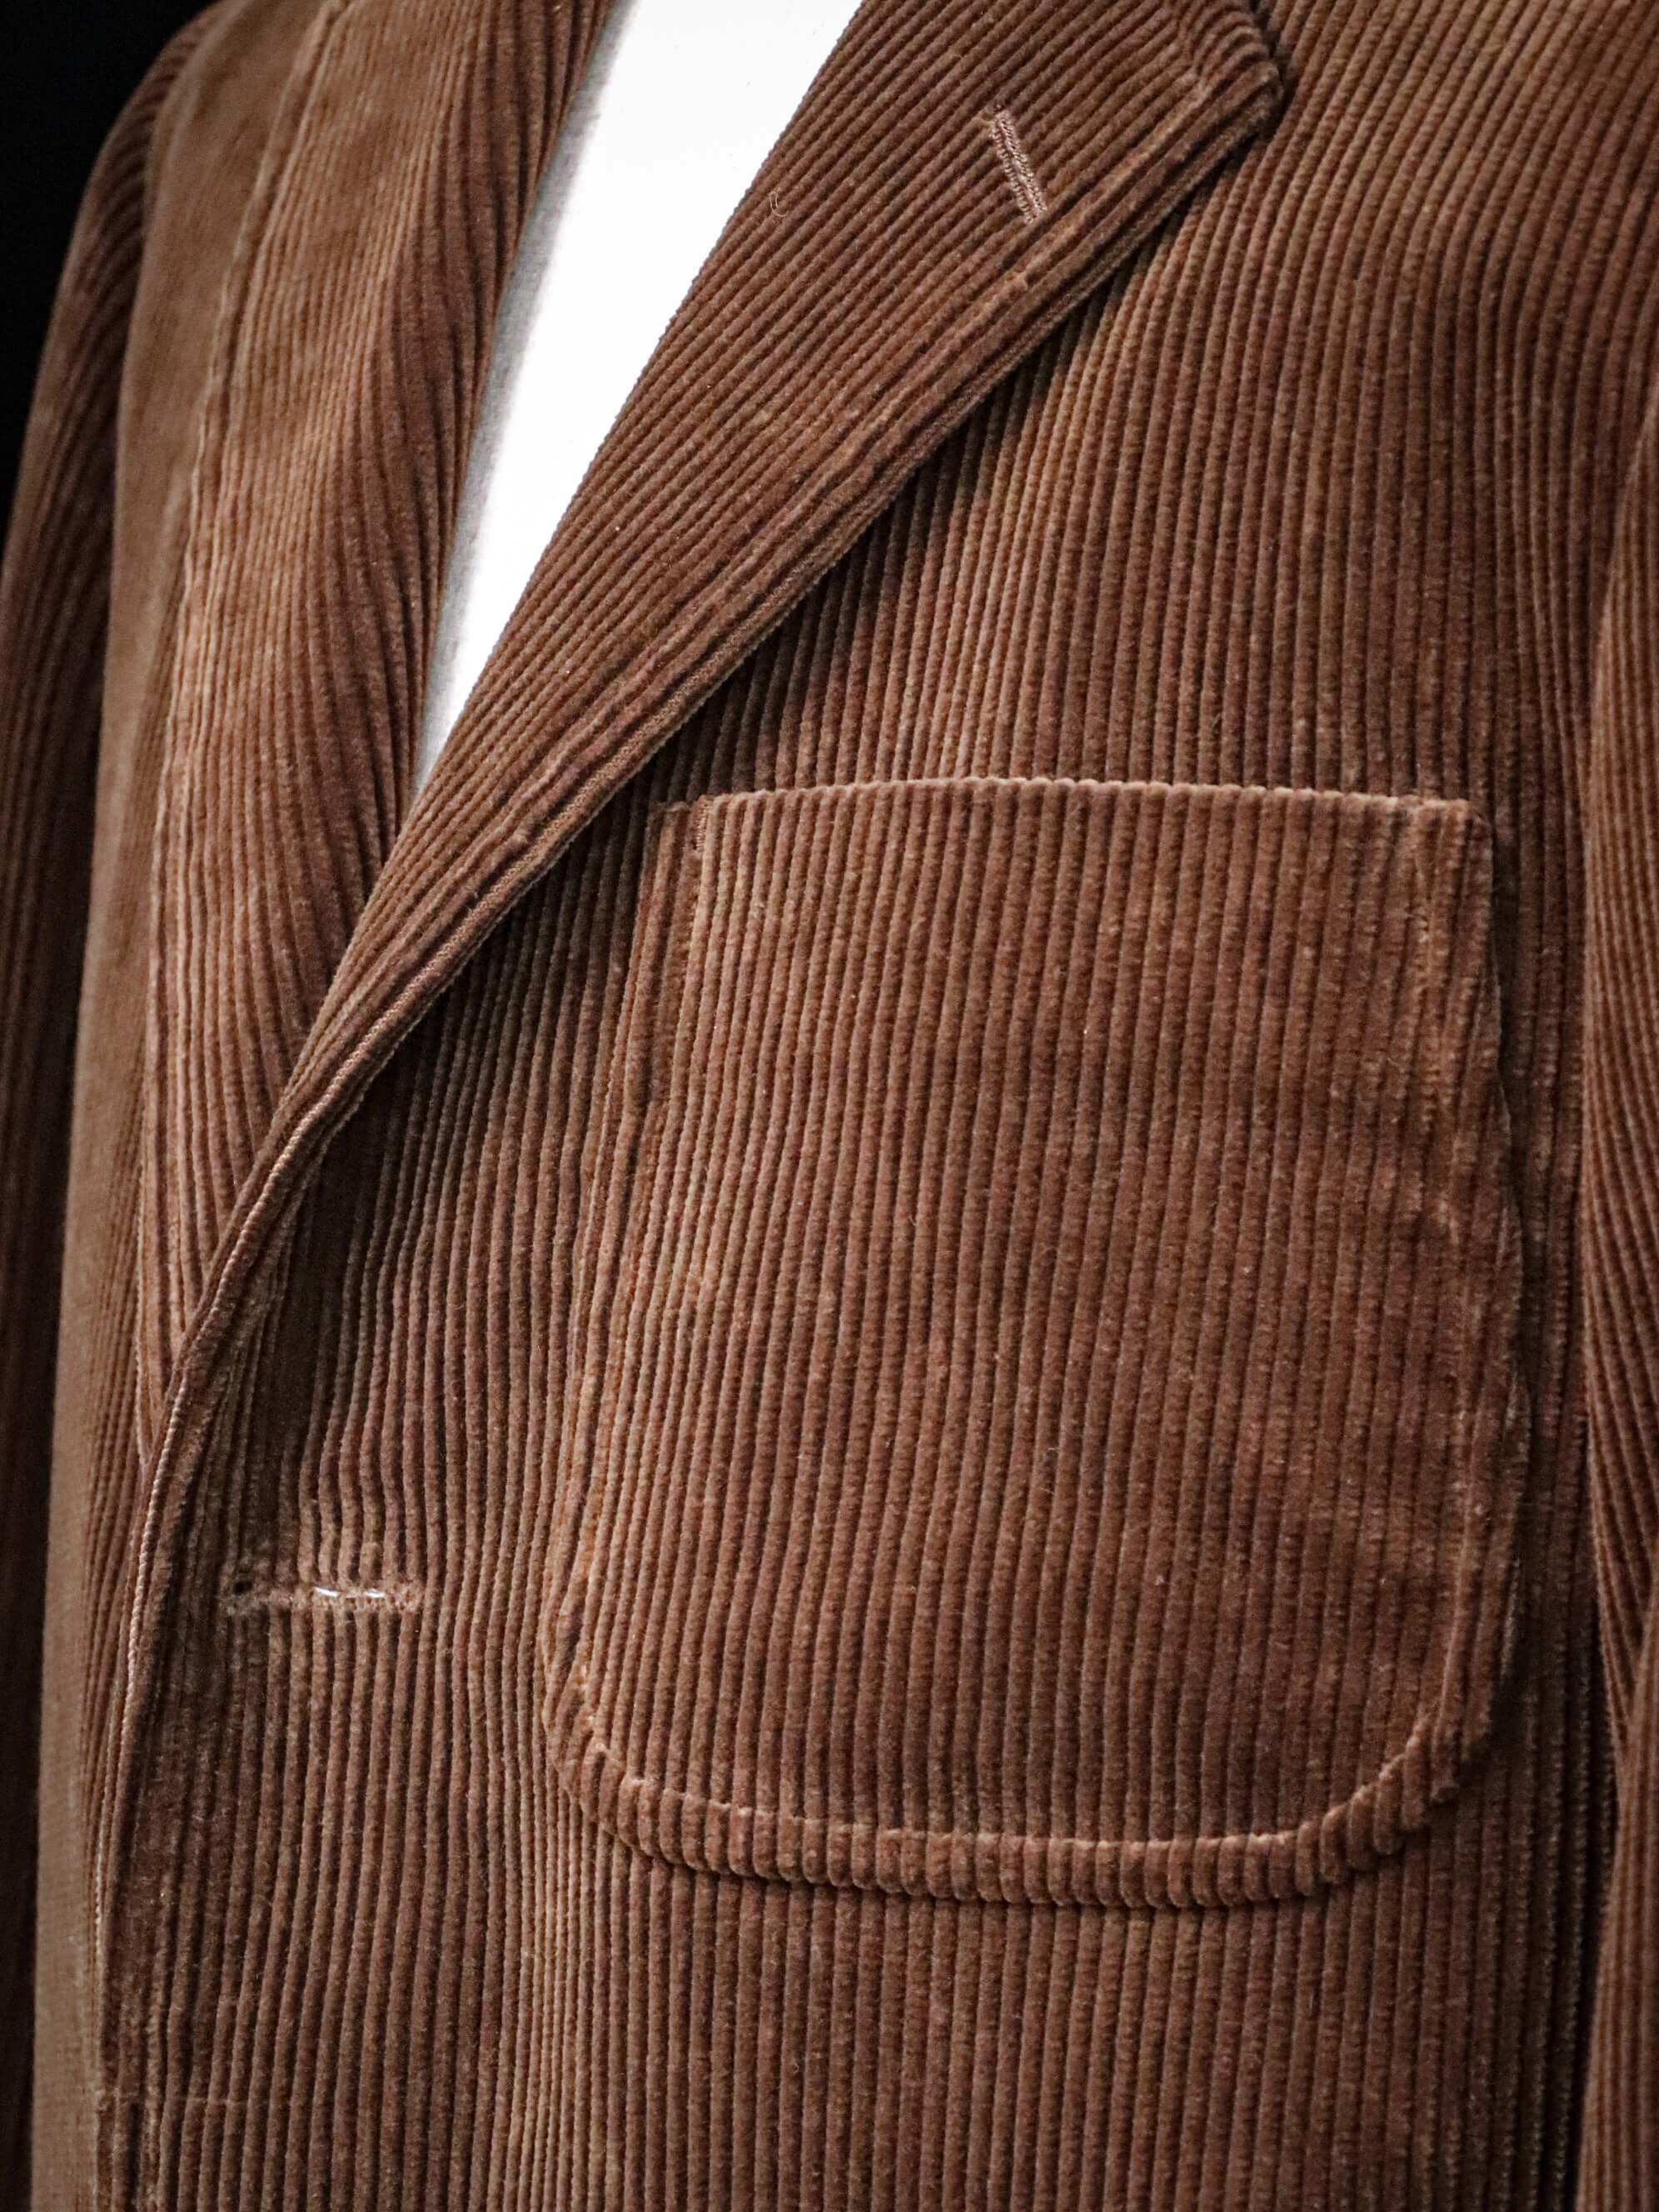 Tailored Jacket 8 Wale Corduroy Brown